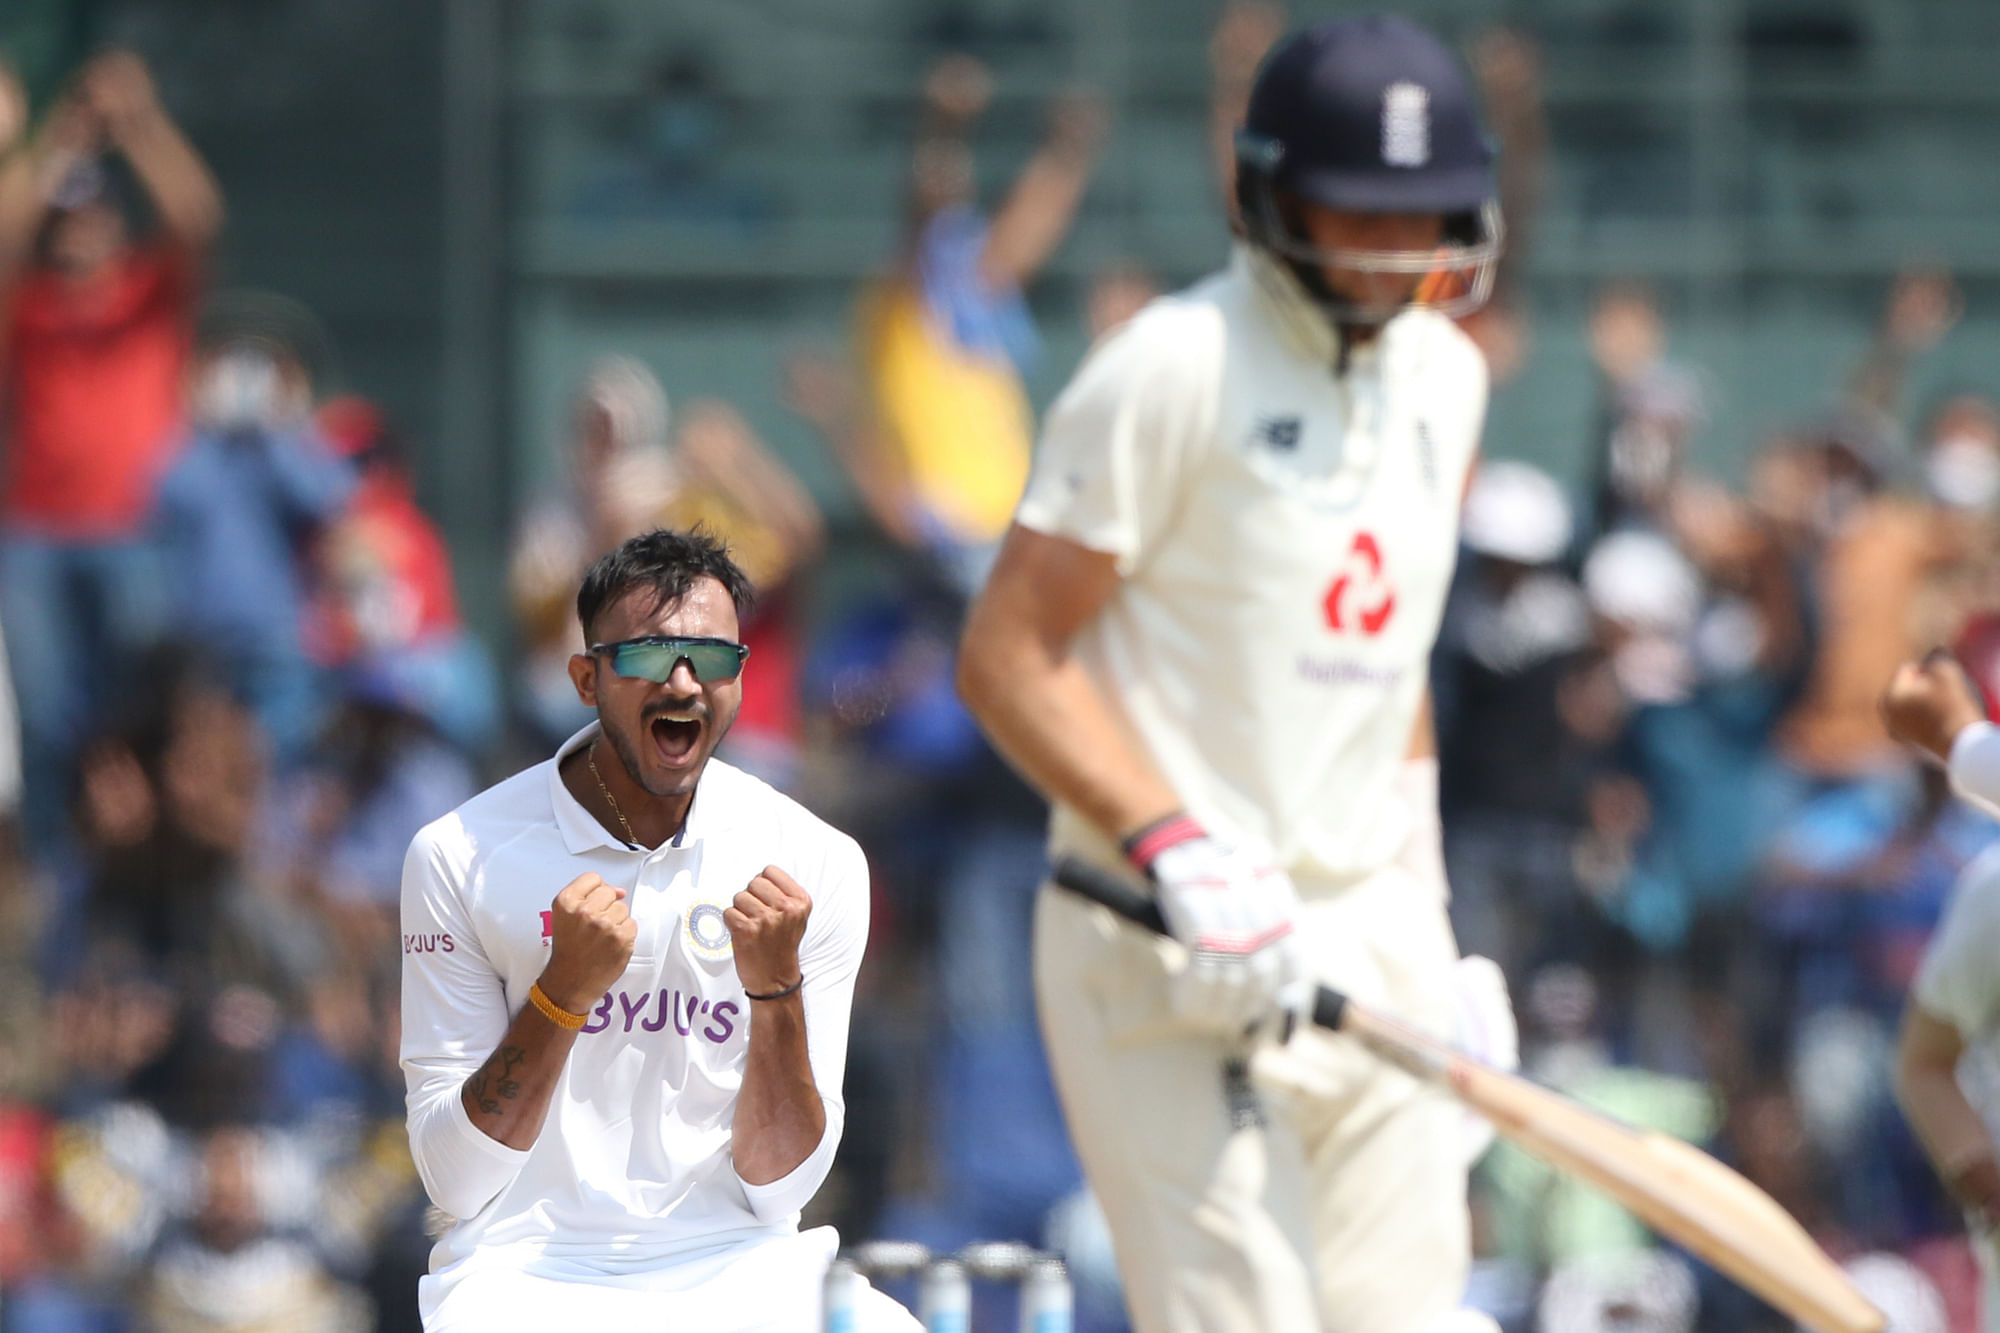 Axar Patel of India celebrates the wicket of Joe Root (captain) of England during day two of the first test match between India and England held at the Chidambaram Stadium stadium in Chennai.